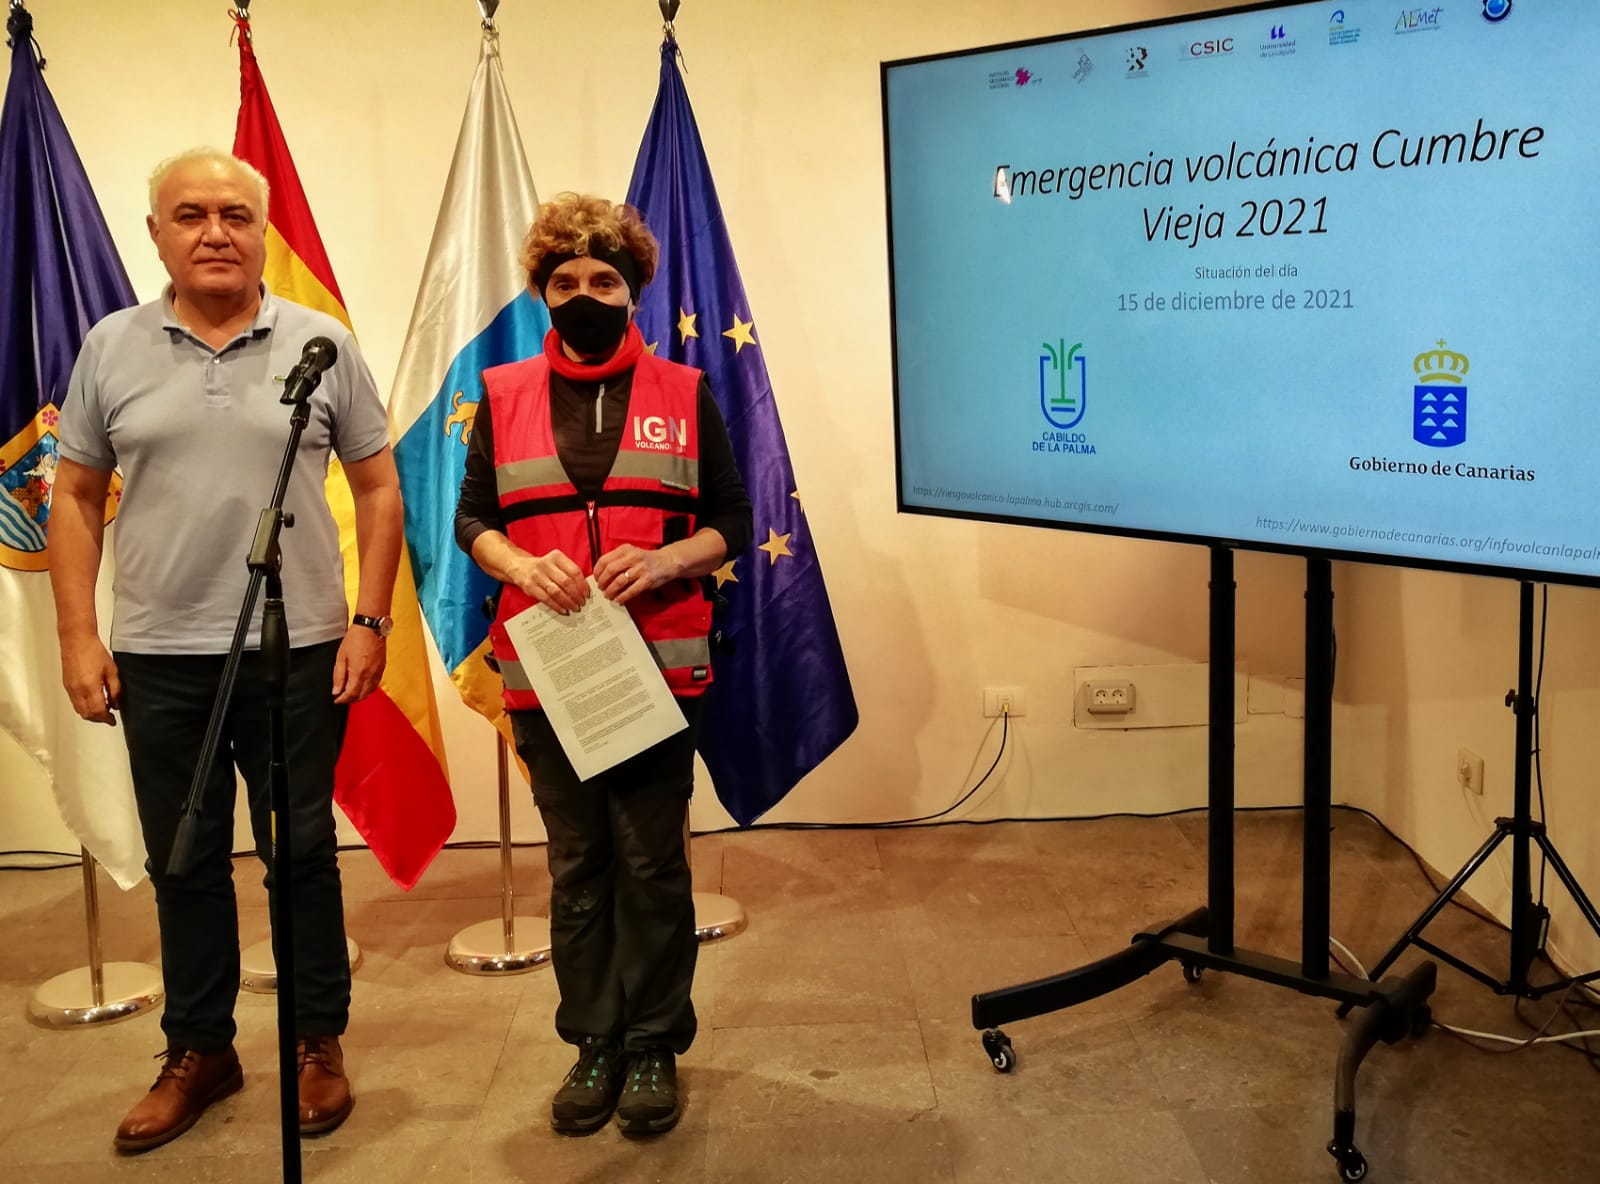 This photo shows Morcuende and Blanco during the press conference on the 15th of December where it was announced that the eruption will not be declared finished until after 10 days without eruptive activity. Sourced from Gobierno de Canarias (2021).